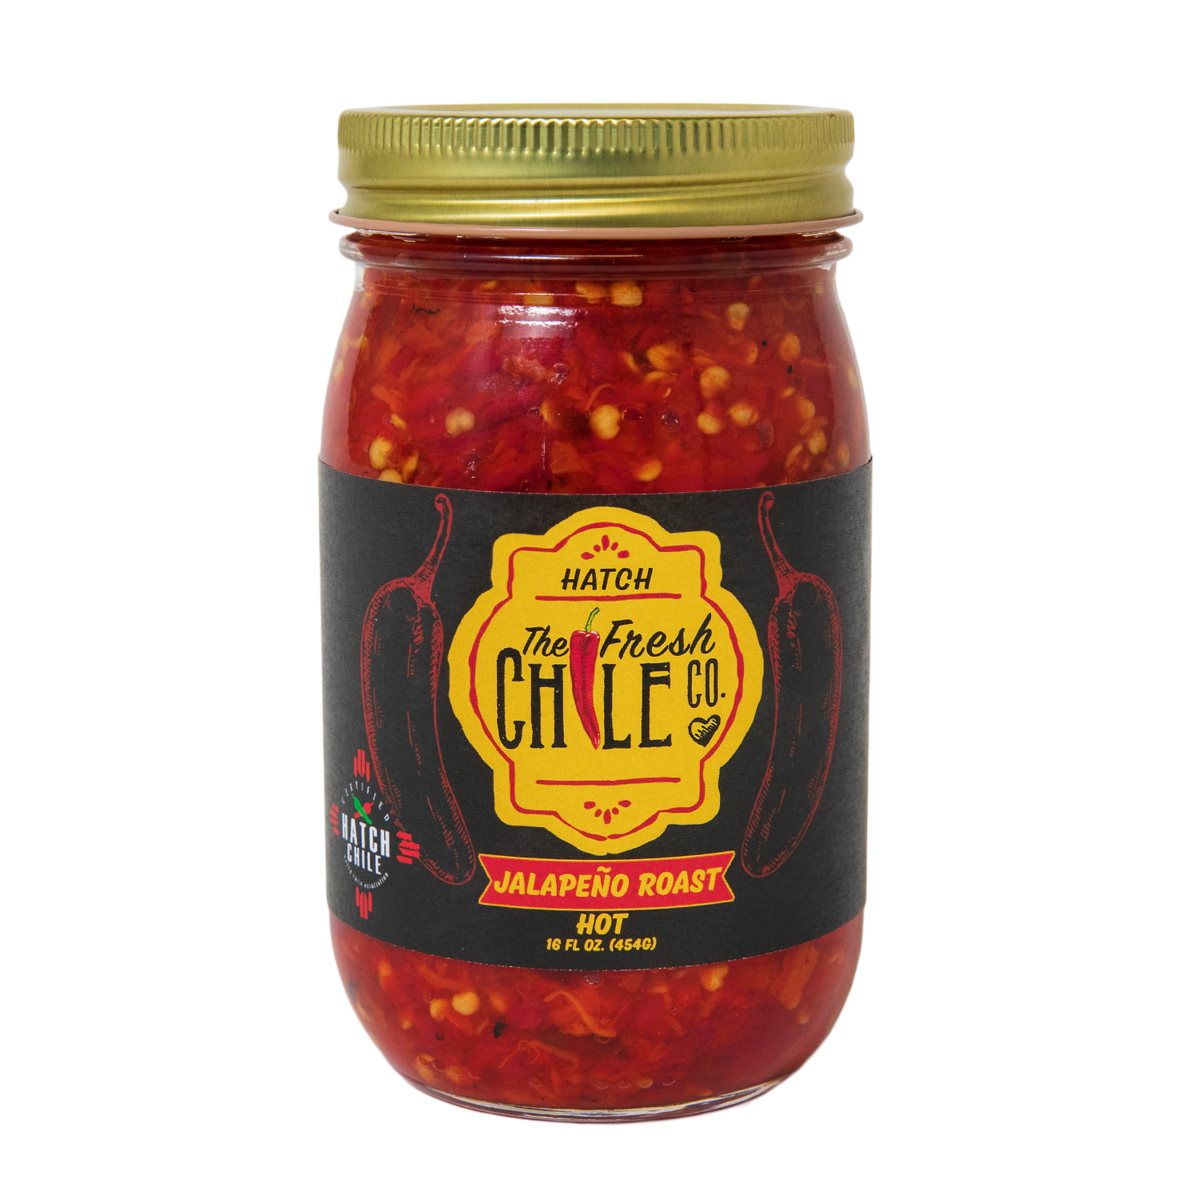 A jar of Hatch Red Jalapeño Roast, labeled as hot, filled with chopped red jalapeños and spices, against a solid black background.